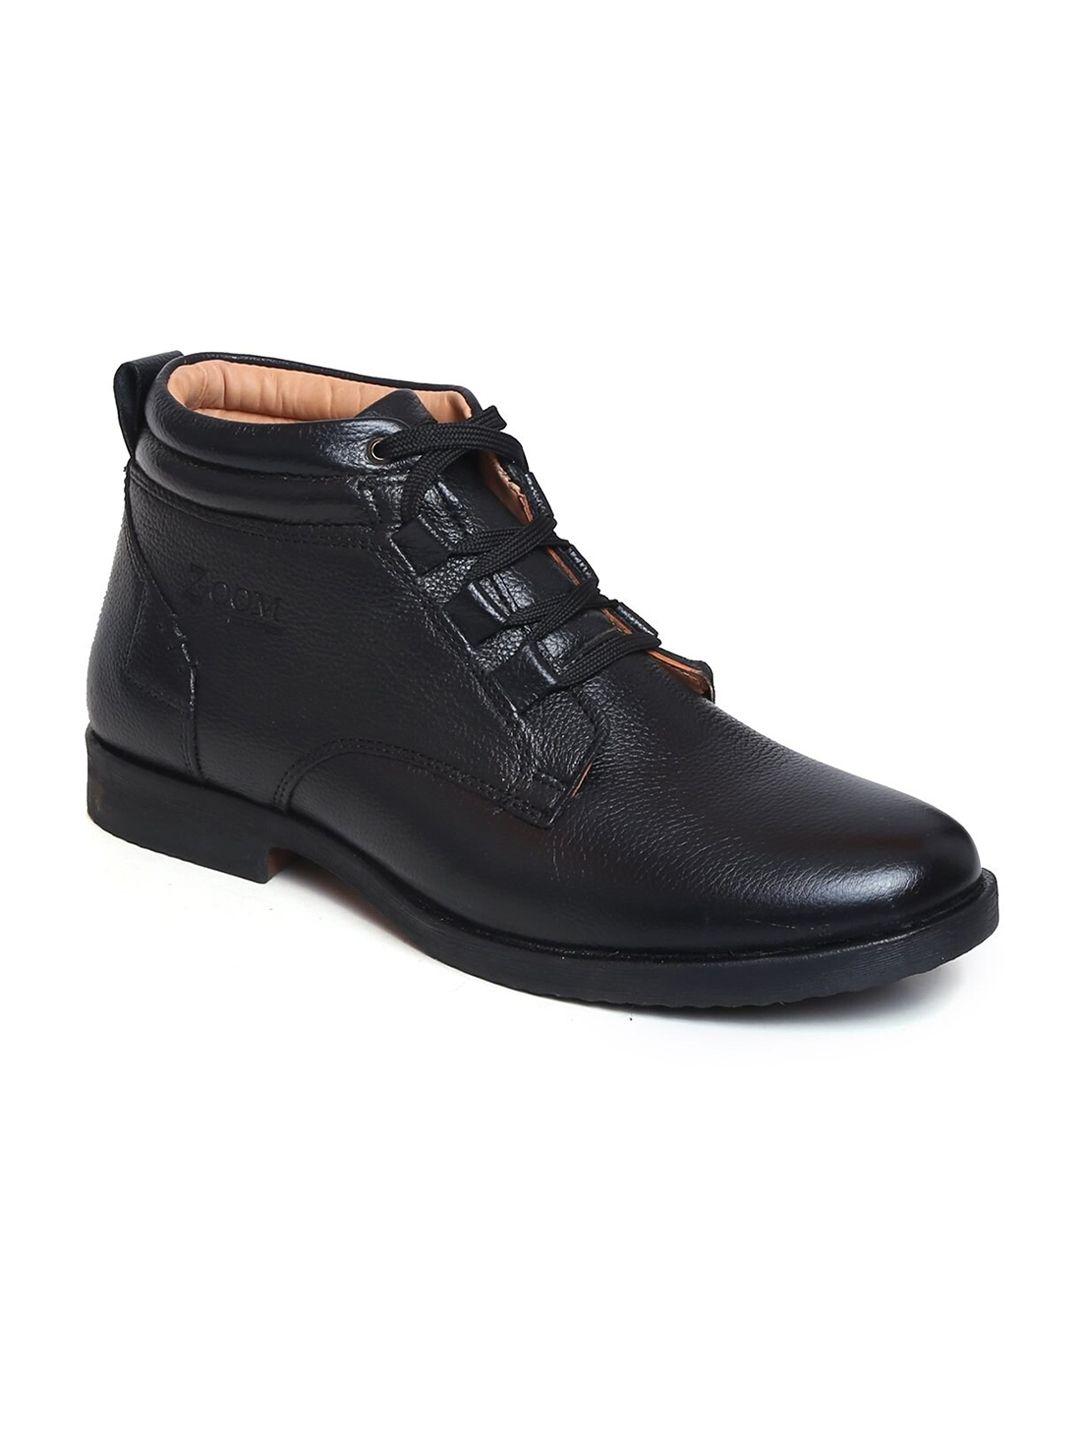 zoom shoes men black solid leather mid-top boots